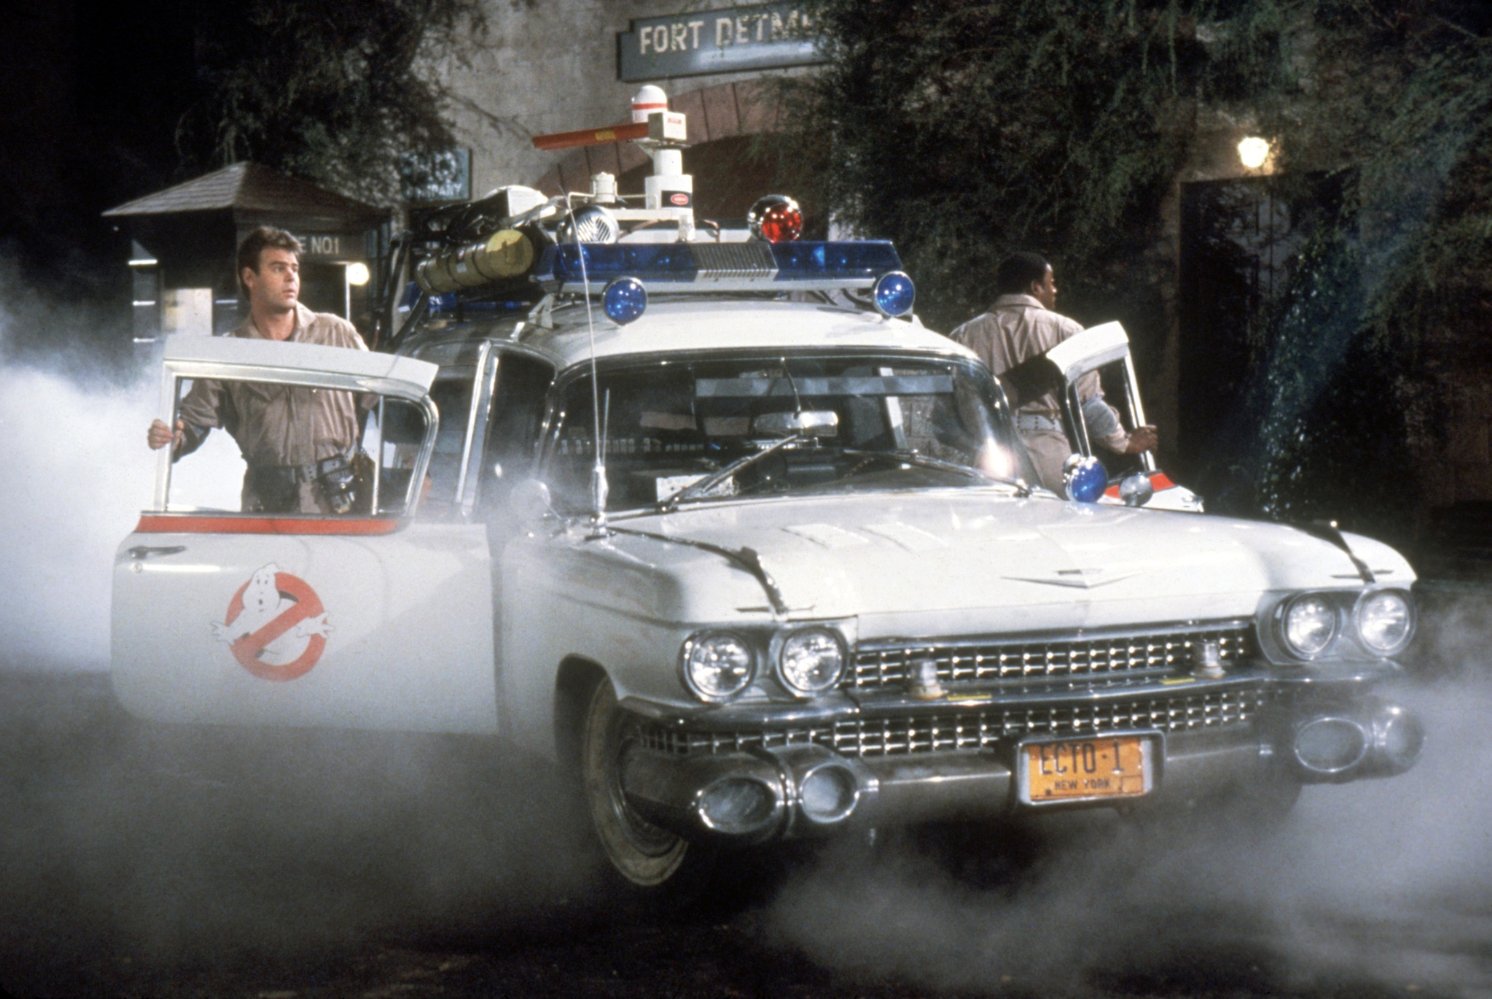 Dan Aykroyd and Ernie Hudson in Ghostbusters (1984). Photo courtesy: Sony Pictures Entertainment